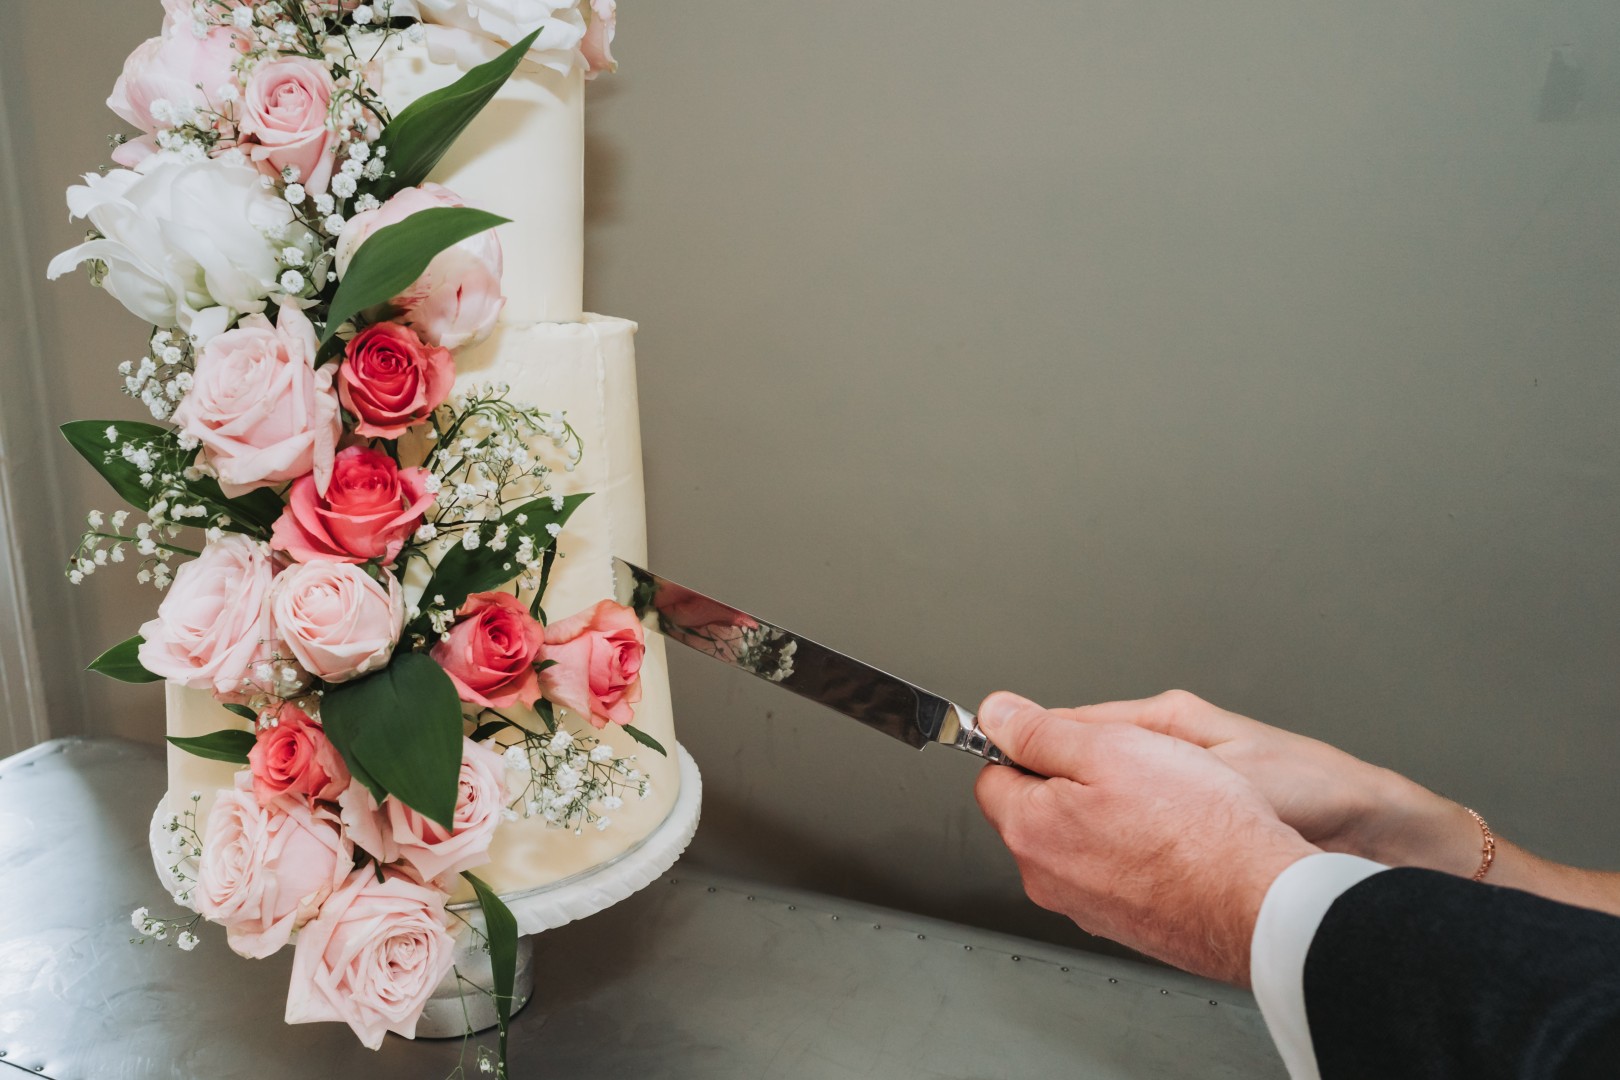 Getting married can be quite stressful but the Kesgrave Hall team took all of that away.